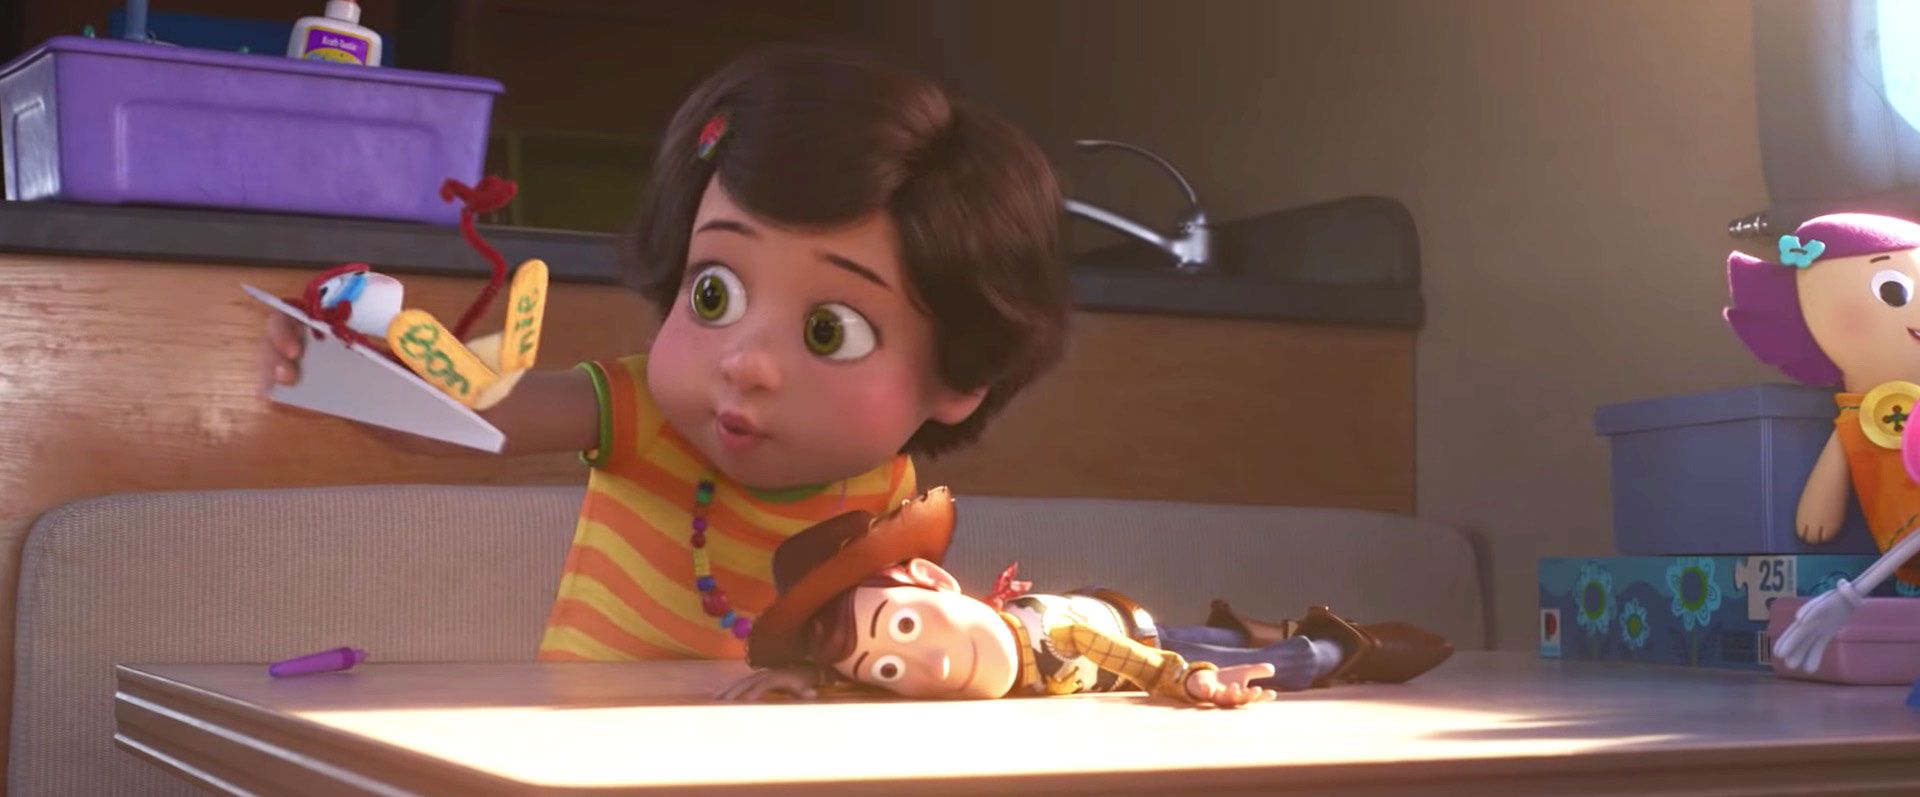 download bonnie anderson toy story 4